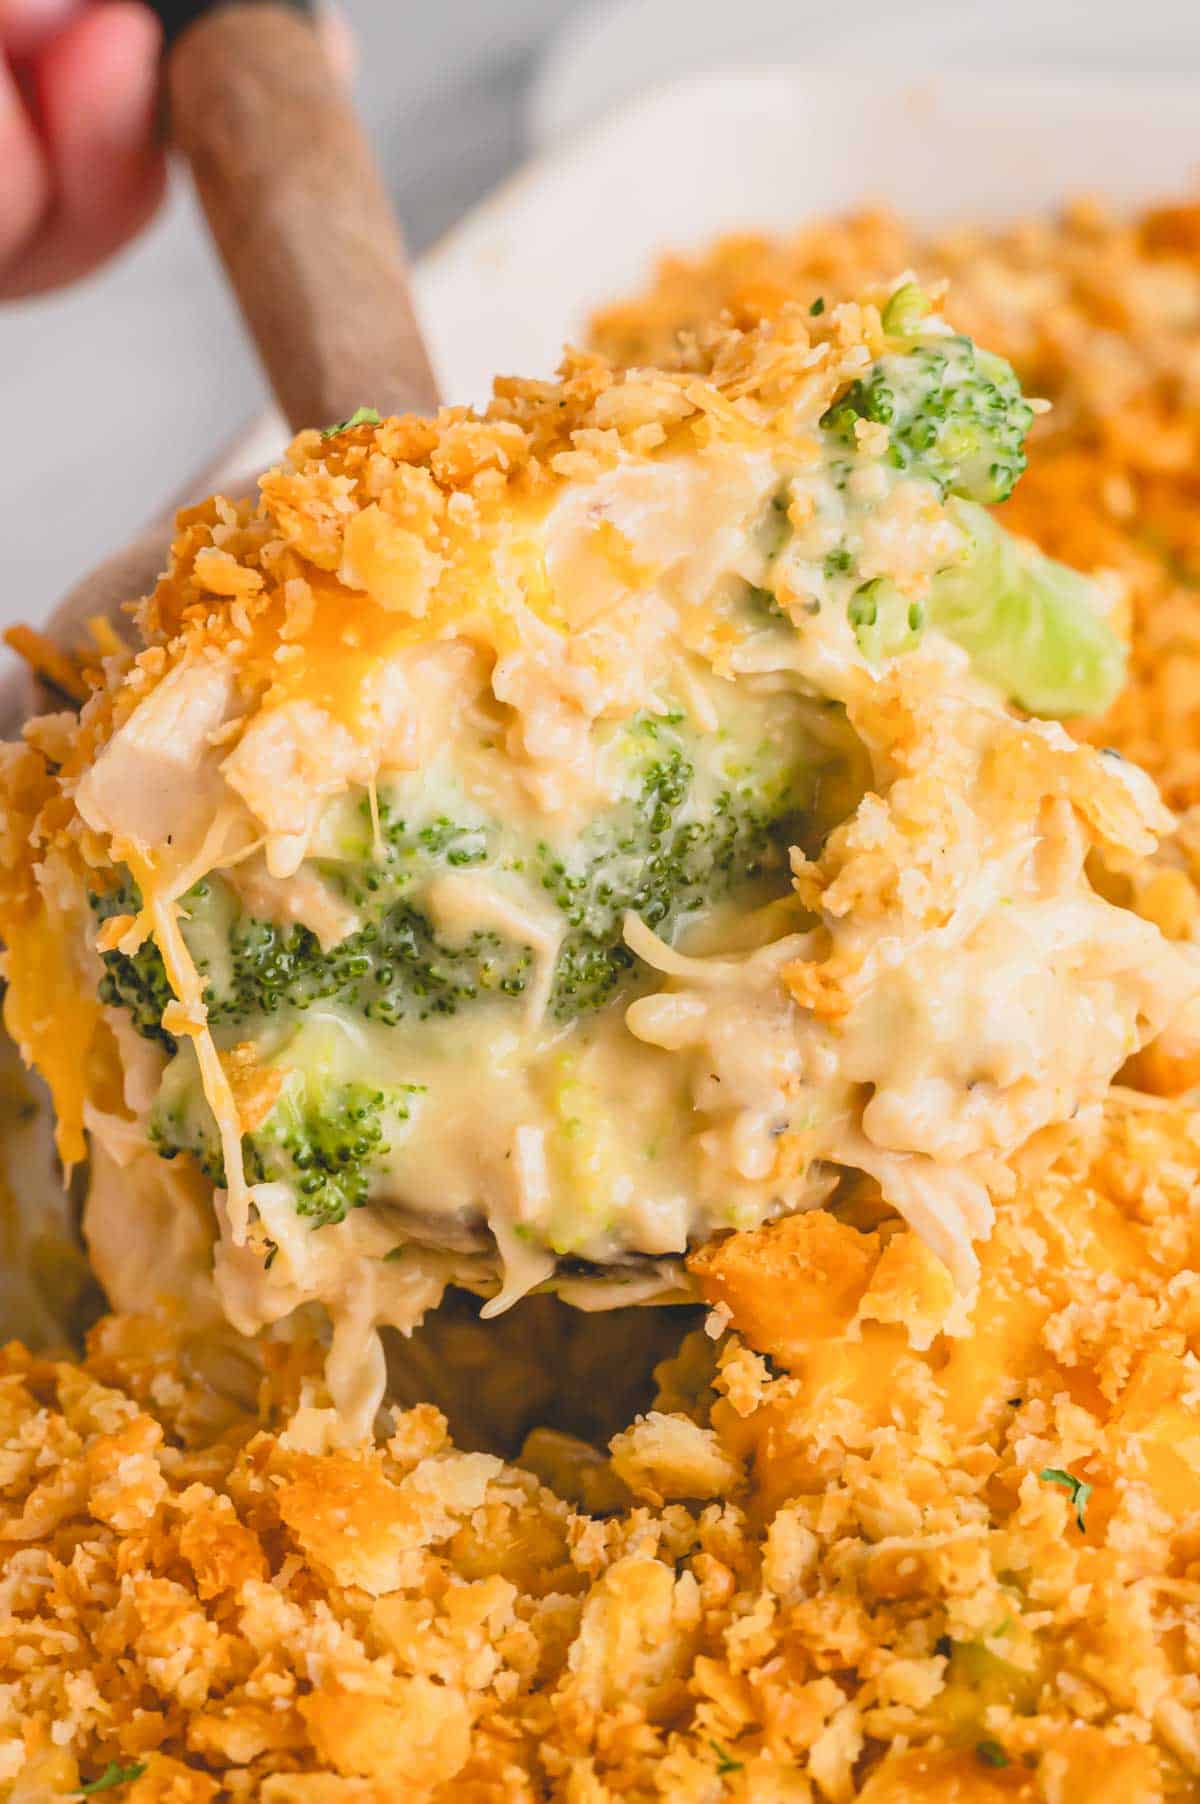 A spoon lifting a scoop of chicken and broccoli casserole from a serving dish.